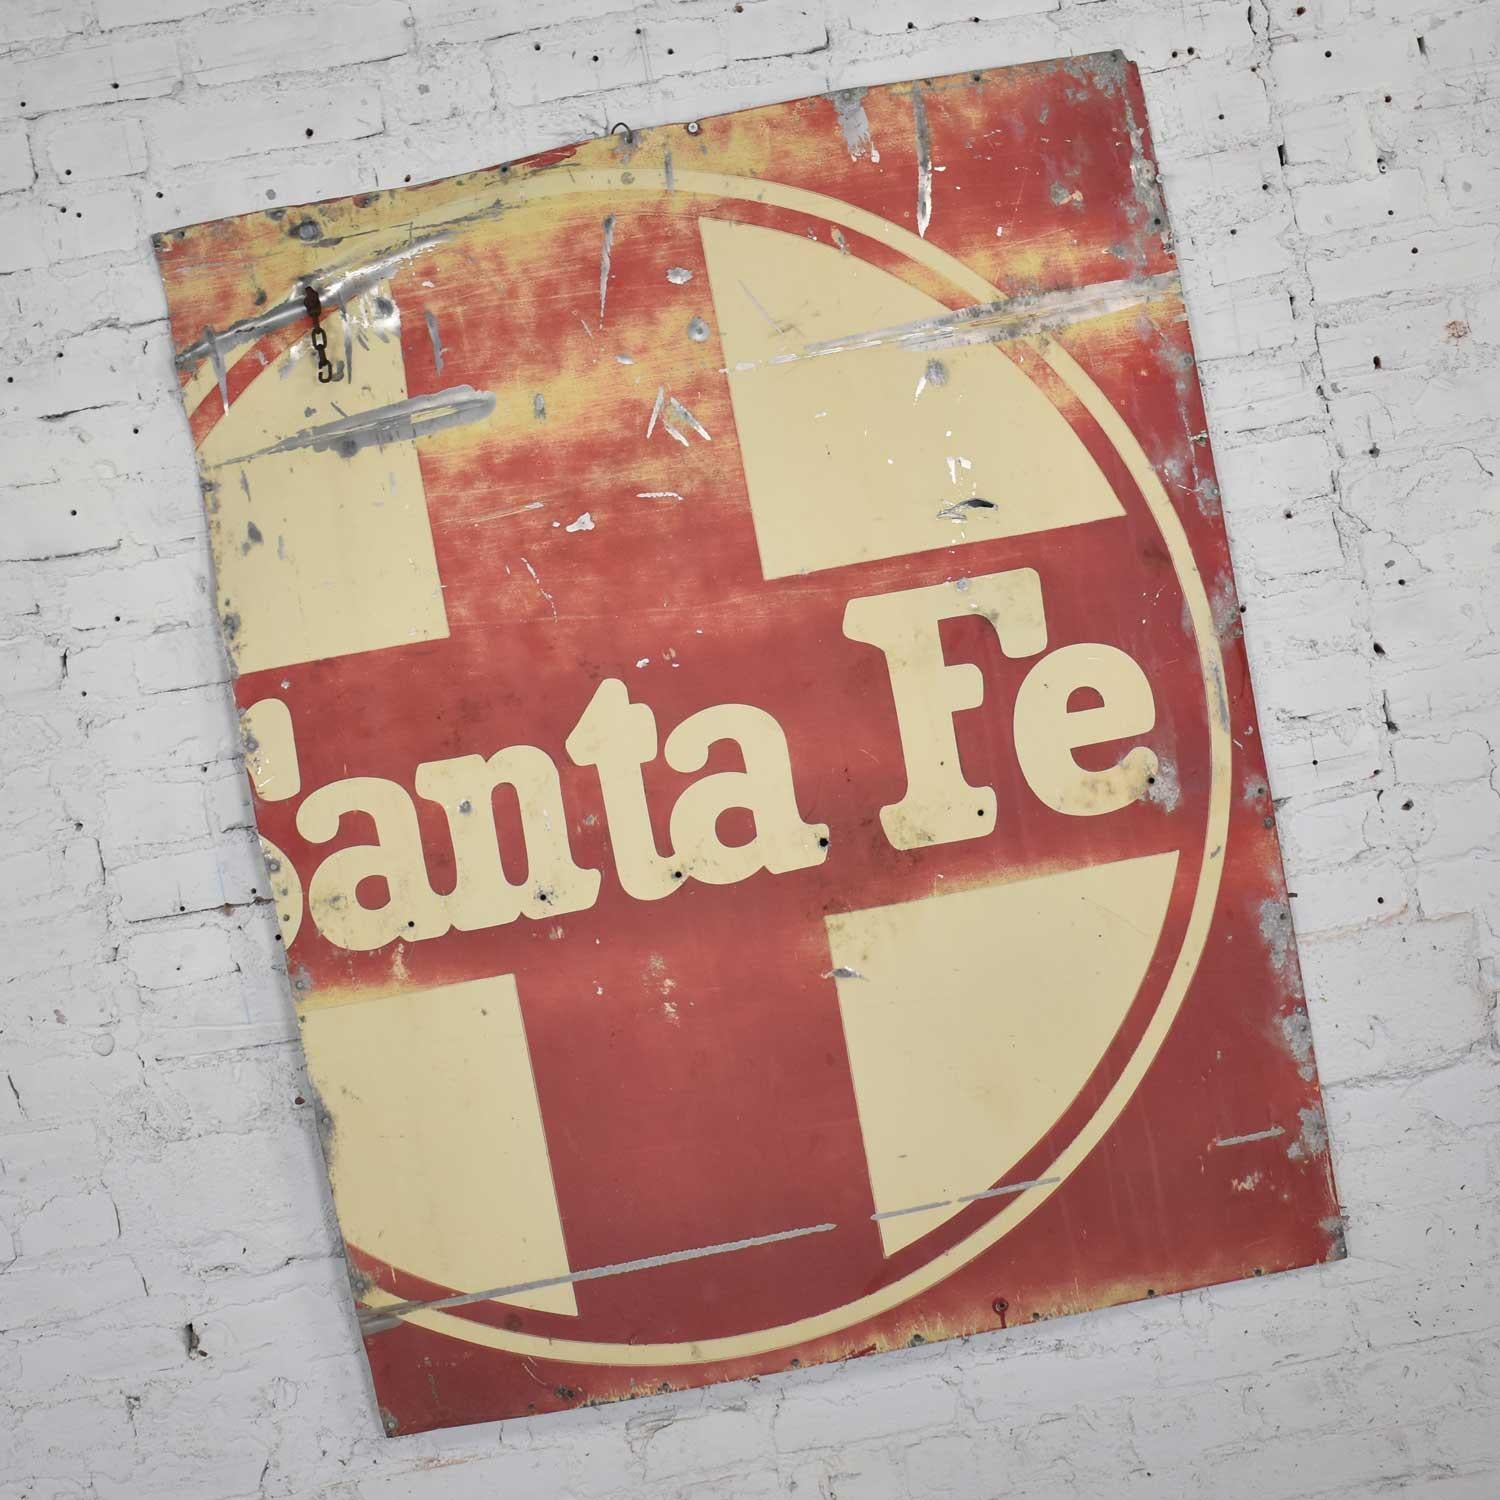 Awesome vintage extra large Santa Fe Railroad red and white painted metal sign. It is in outstanding primitive and rustic condition with lots of gorgeous age patina including missing paint and fading. Please see photos, circa mid-20th